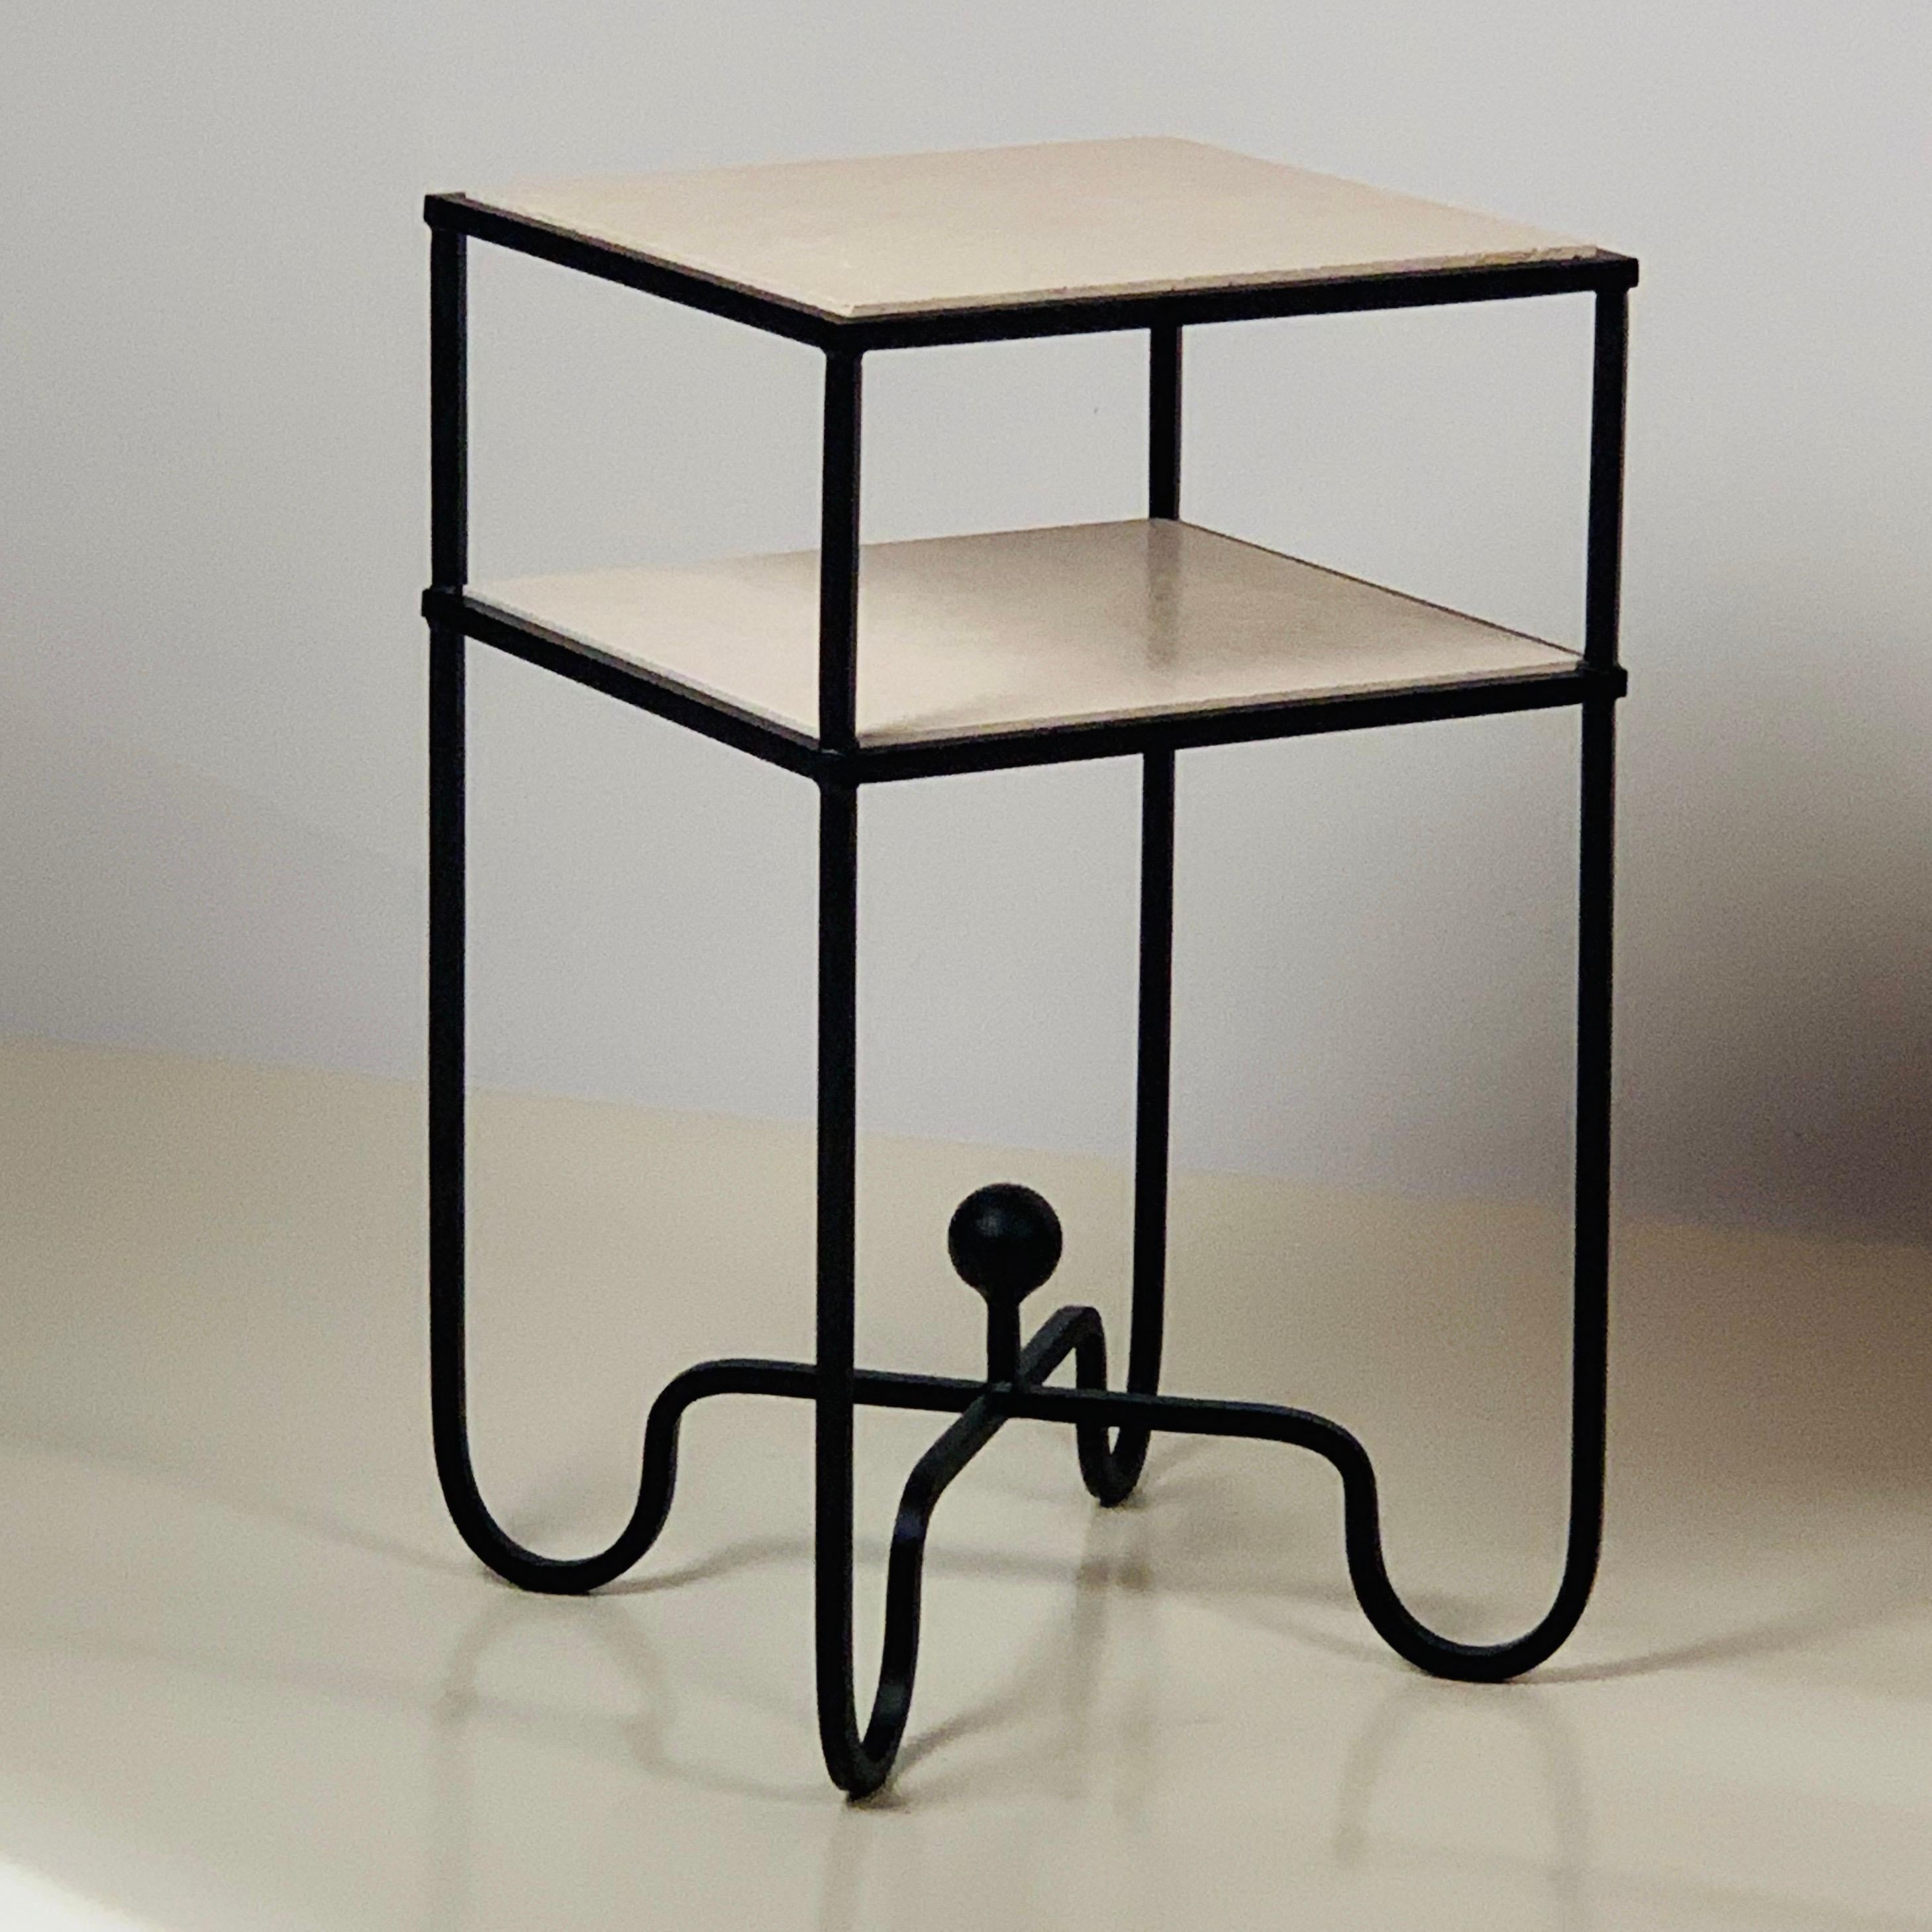 European In-Stock Pair of 2-Tier Entretoise Side Tables by Design Frères For Sale